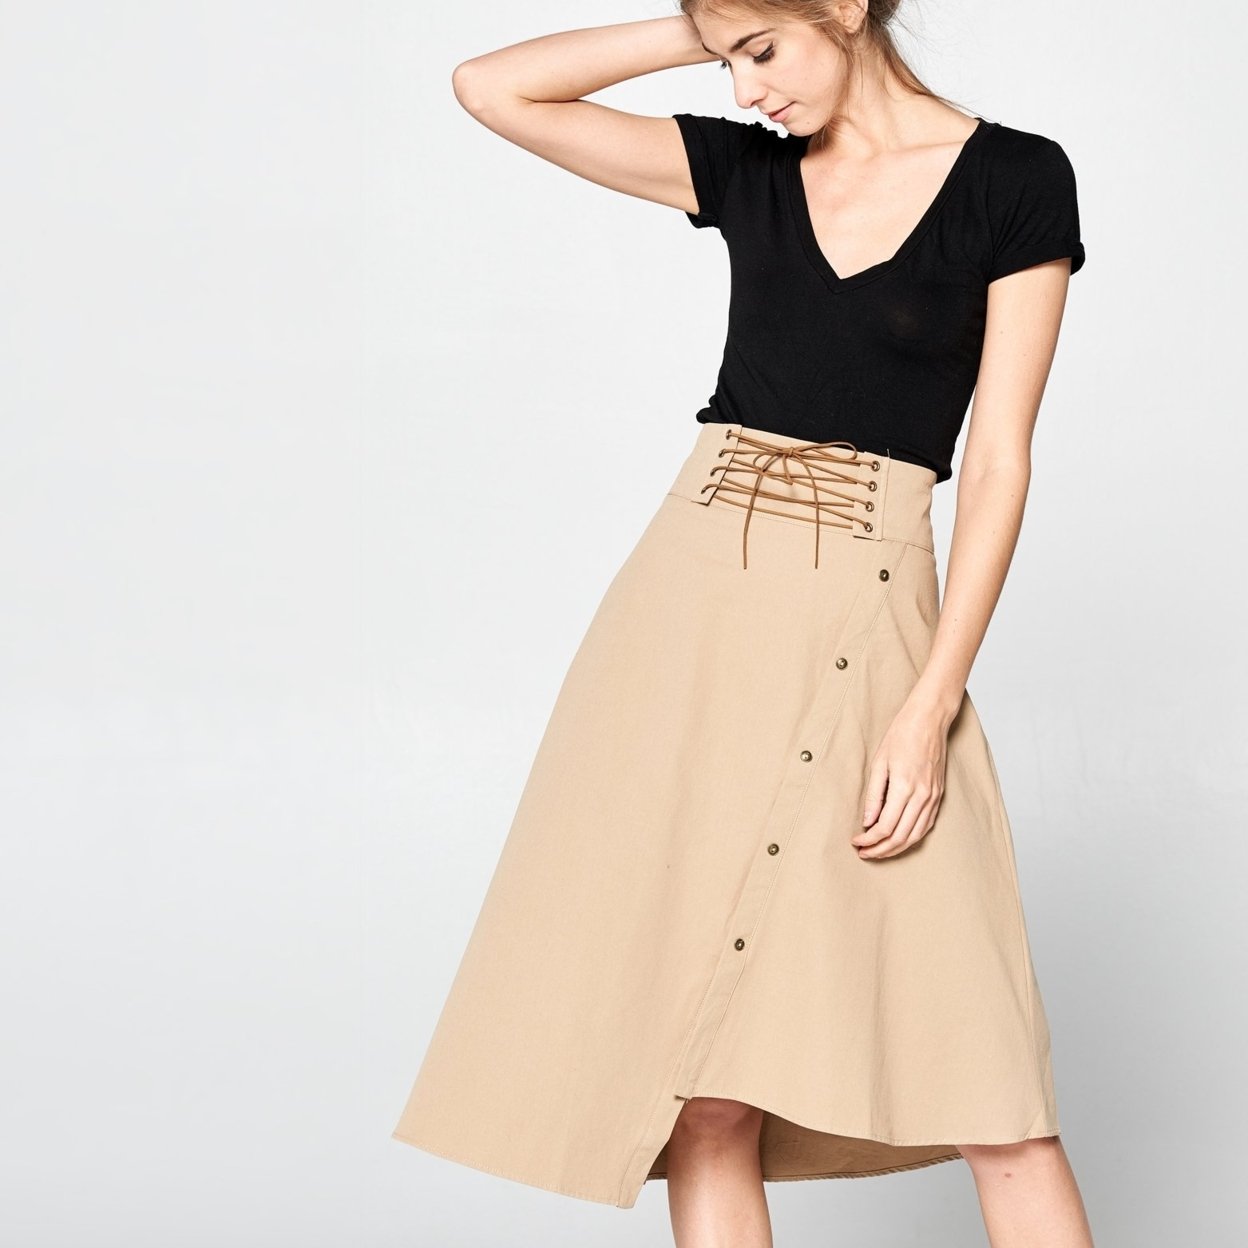 Uneven Cotton Twill Skirt - Taupe, Small (2-6)